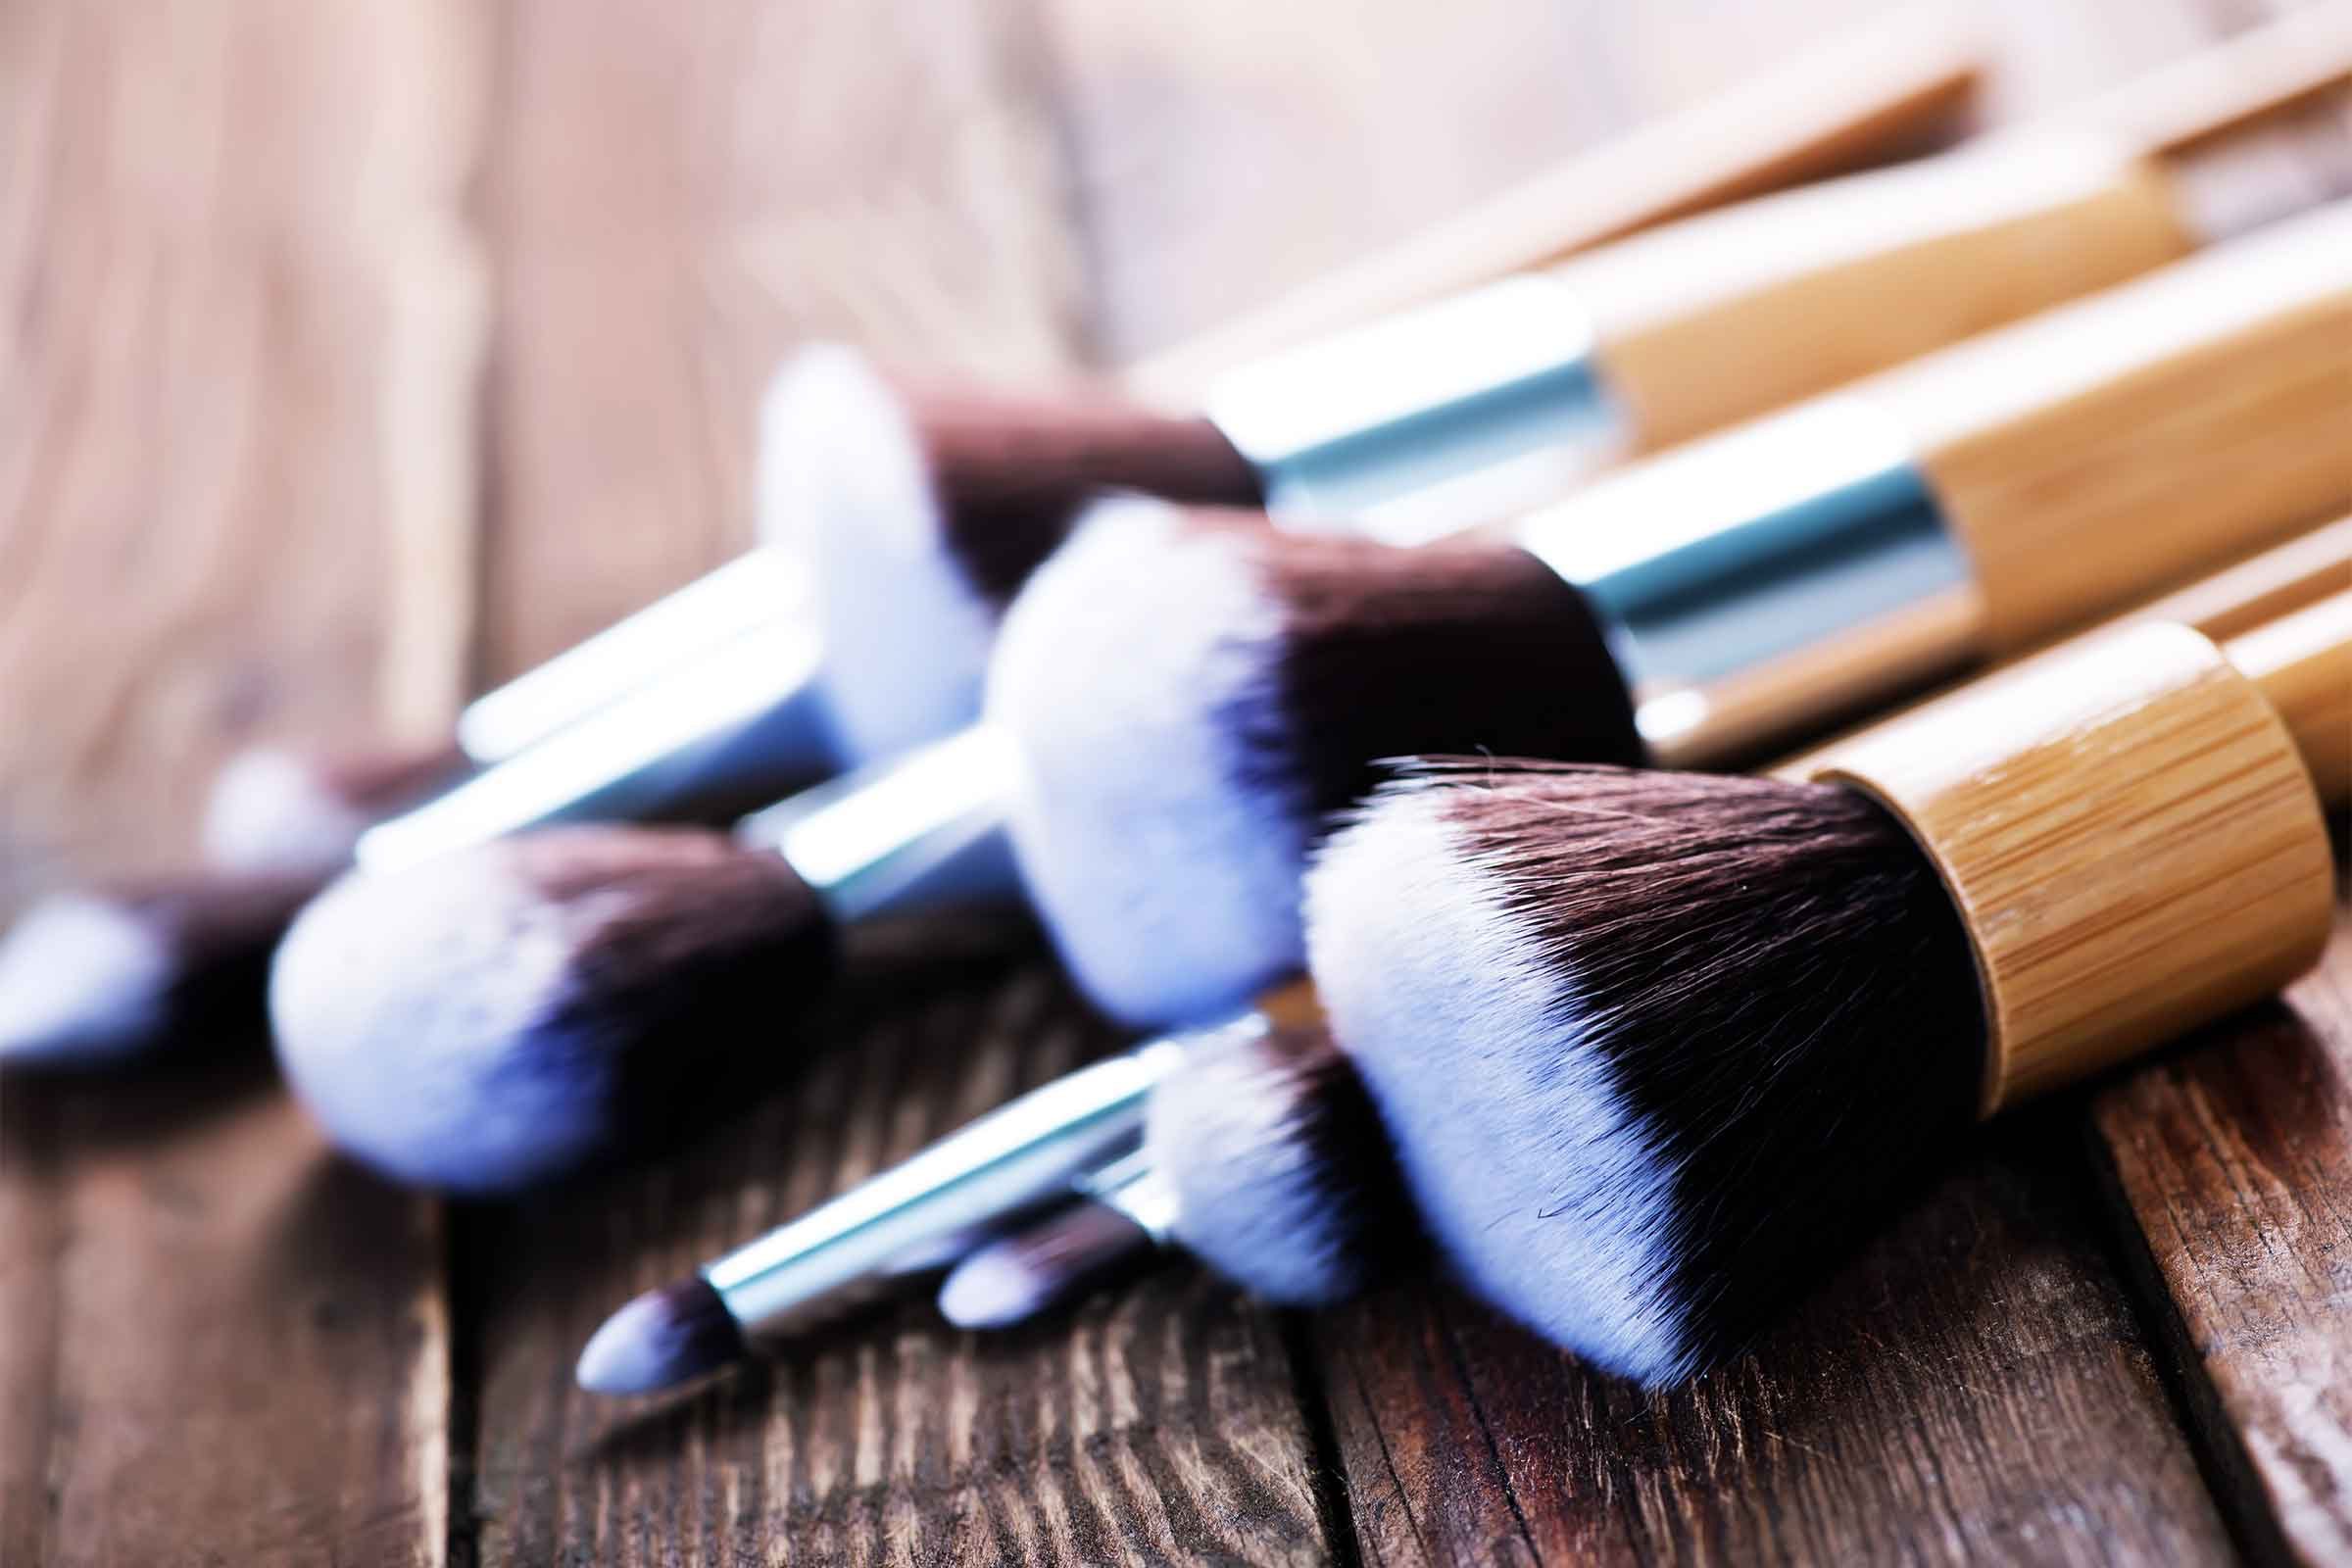 makeup brushes and tools